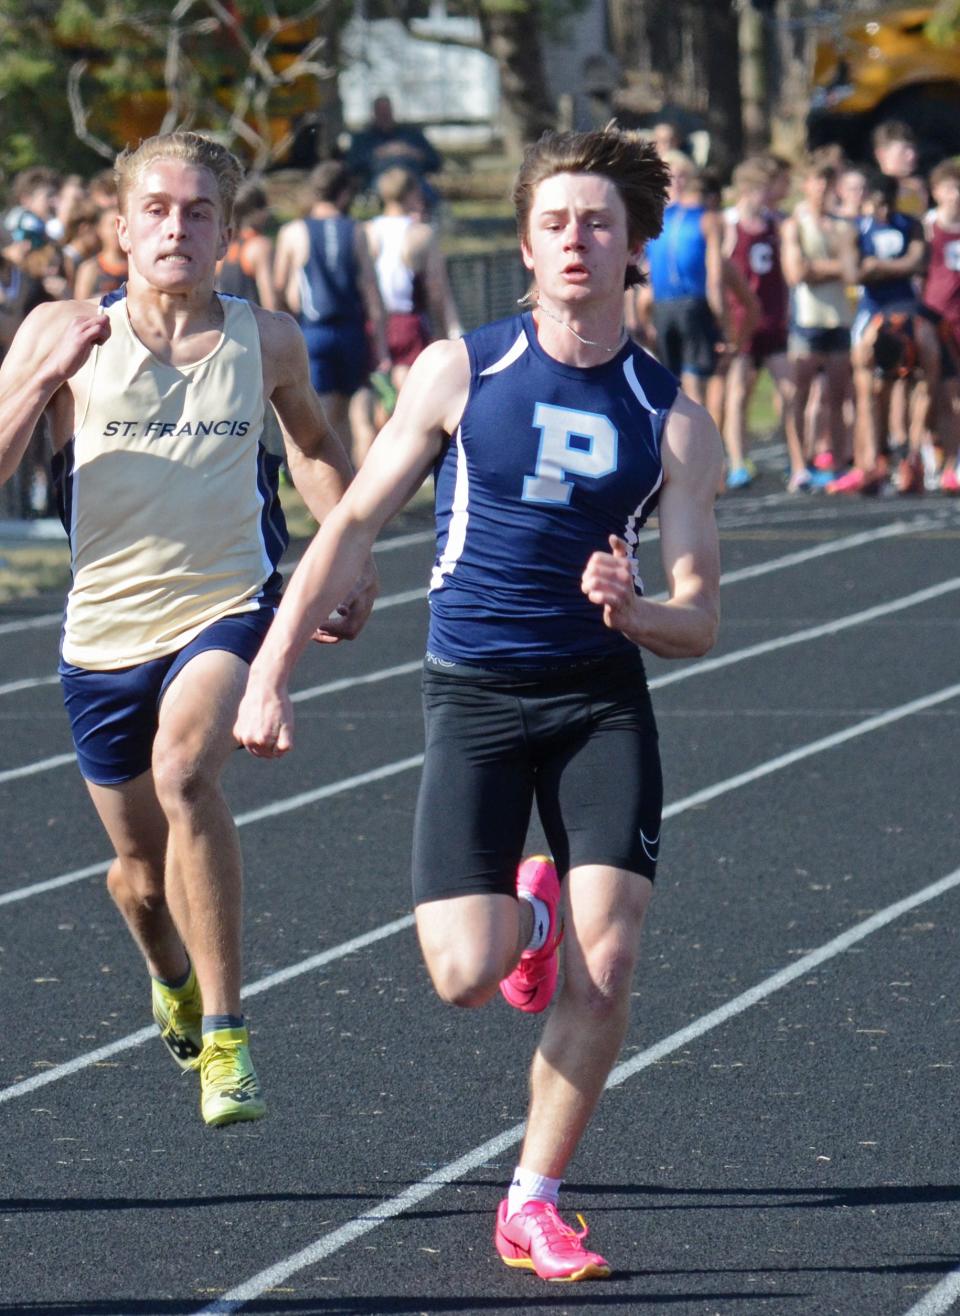 Petoskey's Sam Mitas sprints in the opening leg of the 100 meter dash. Mitas placed third overall in the race of more than 80 runners.